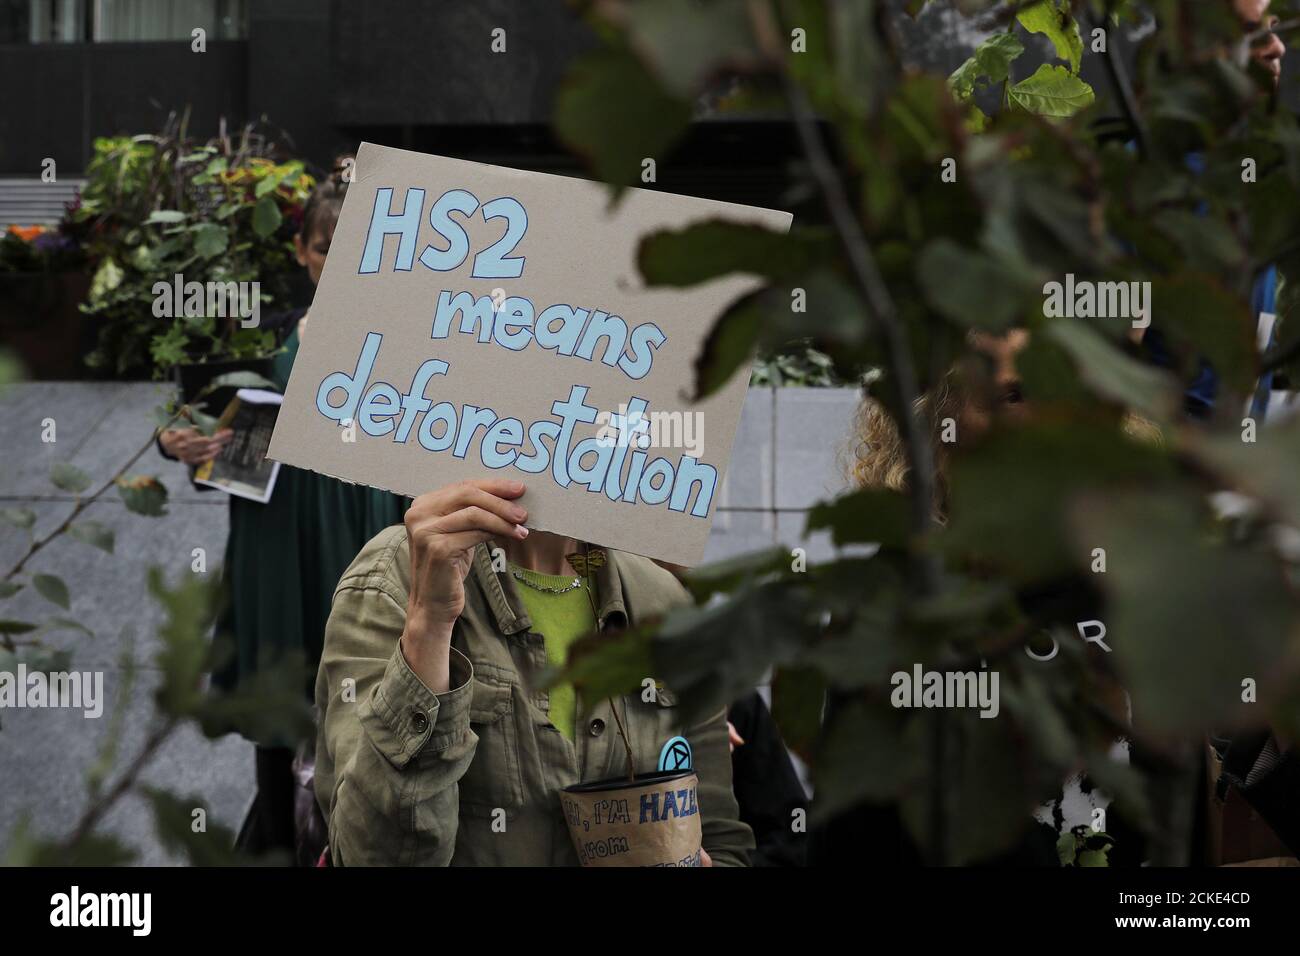 An anti-HS2 protester holds a placard as she demonstrates outside the High Speed 2 headquarters at Euston Station in London, Britain September 28, 2019. REUTERS/Simon Dawson Stock Photo